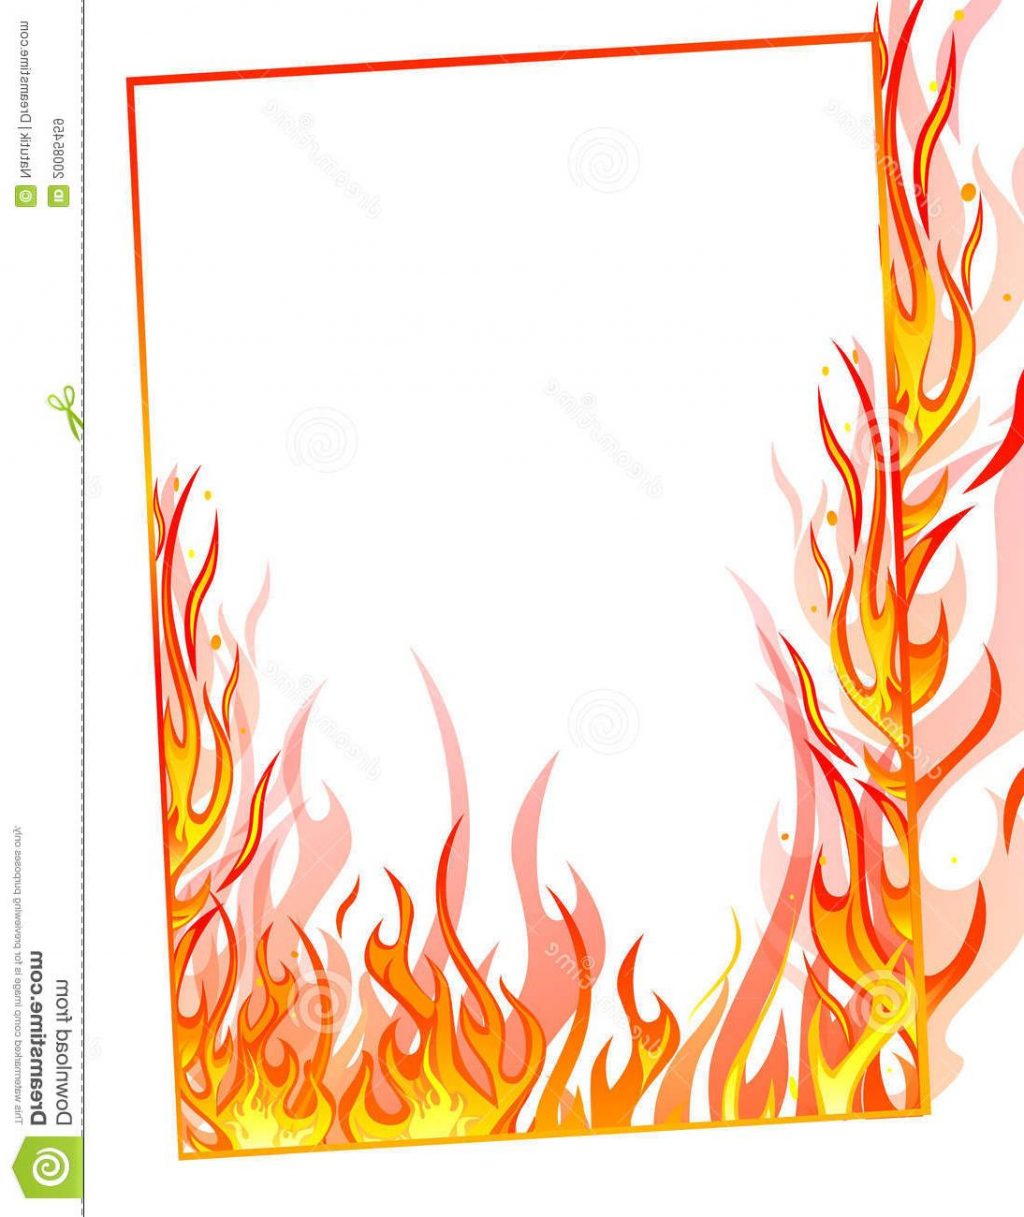 Flame clipart frame. Cliparts making the web